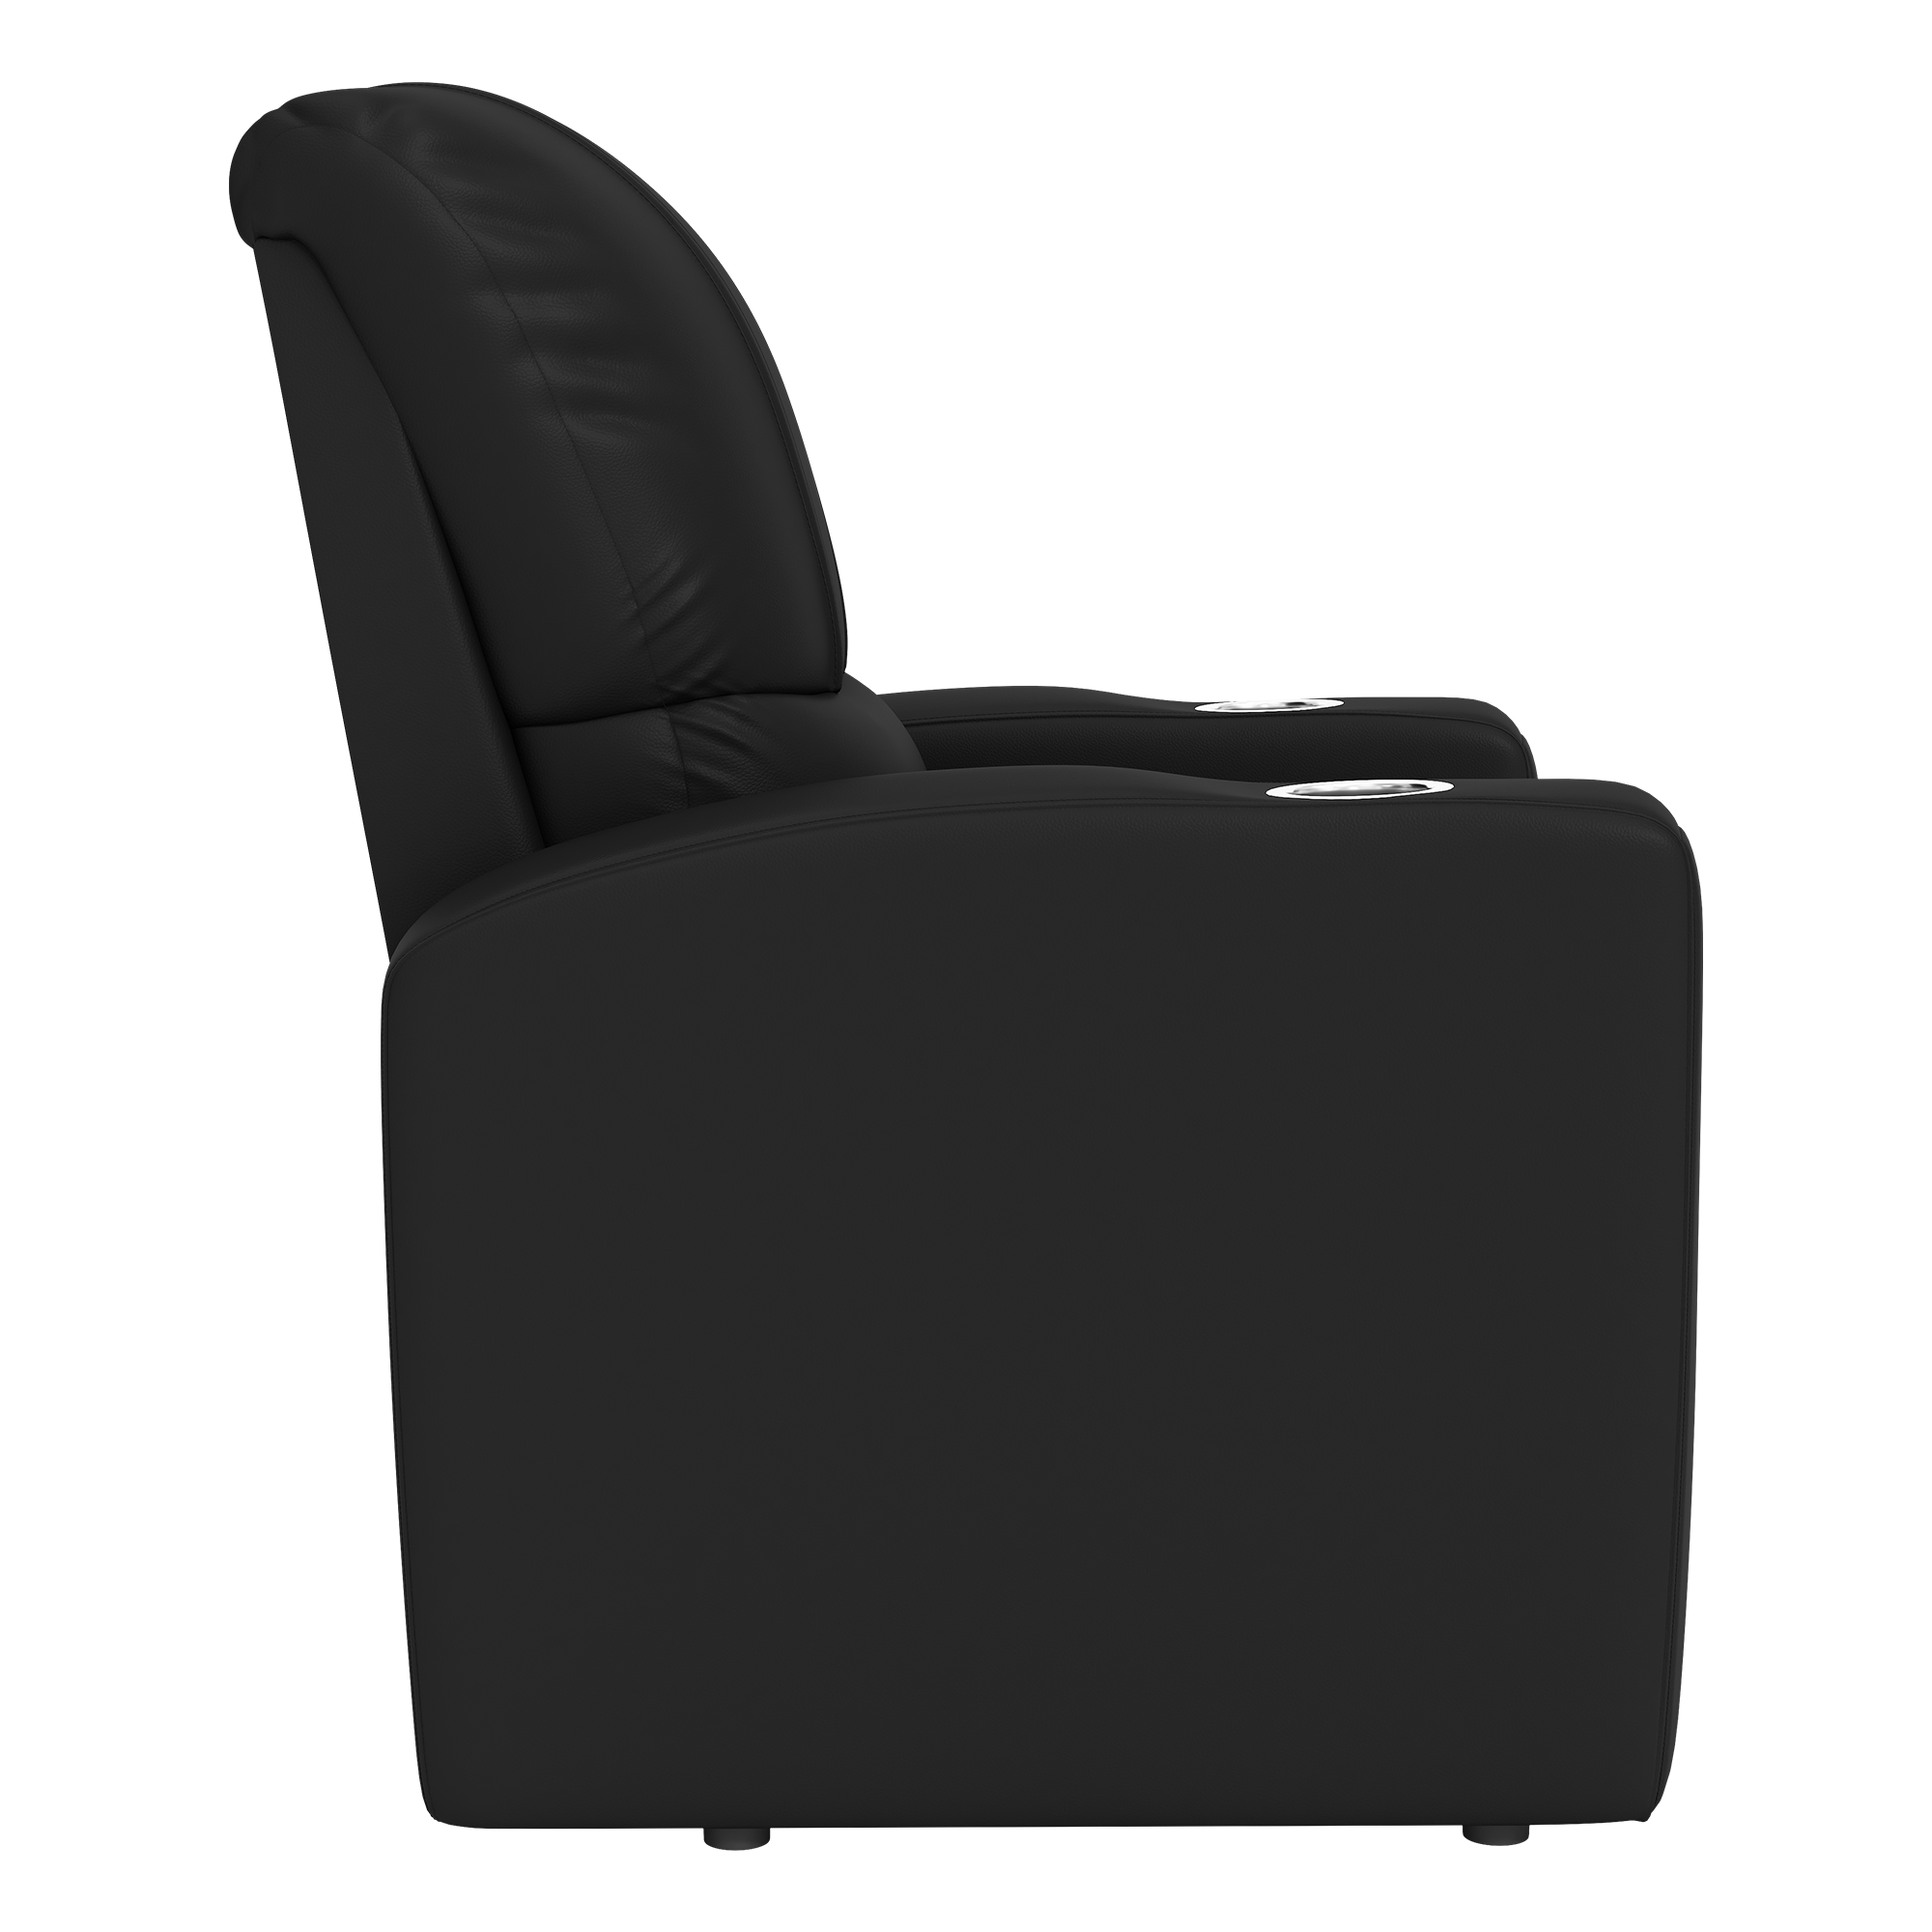 Stealth Recliner with Philadelphia 76ers GC All White [CAN ONLY BE SHIPPED TO PENNSYLVANIA]